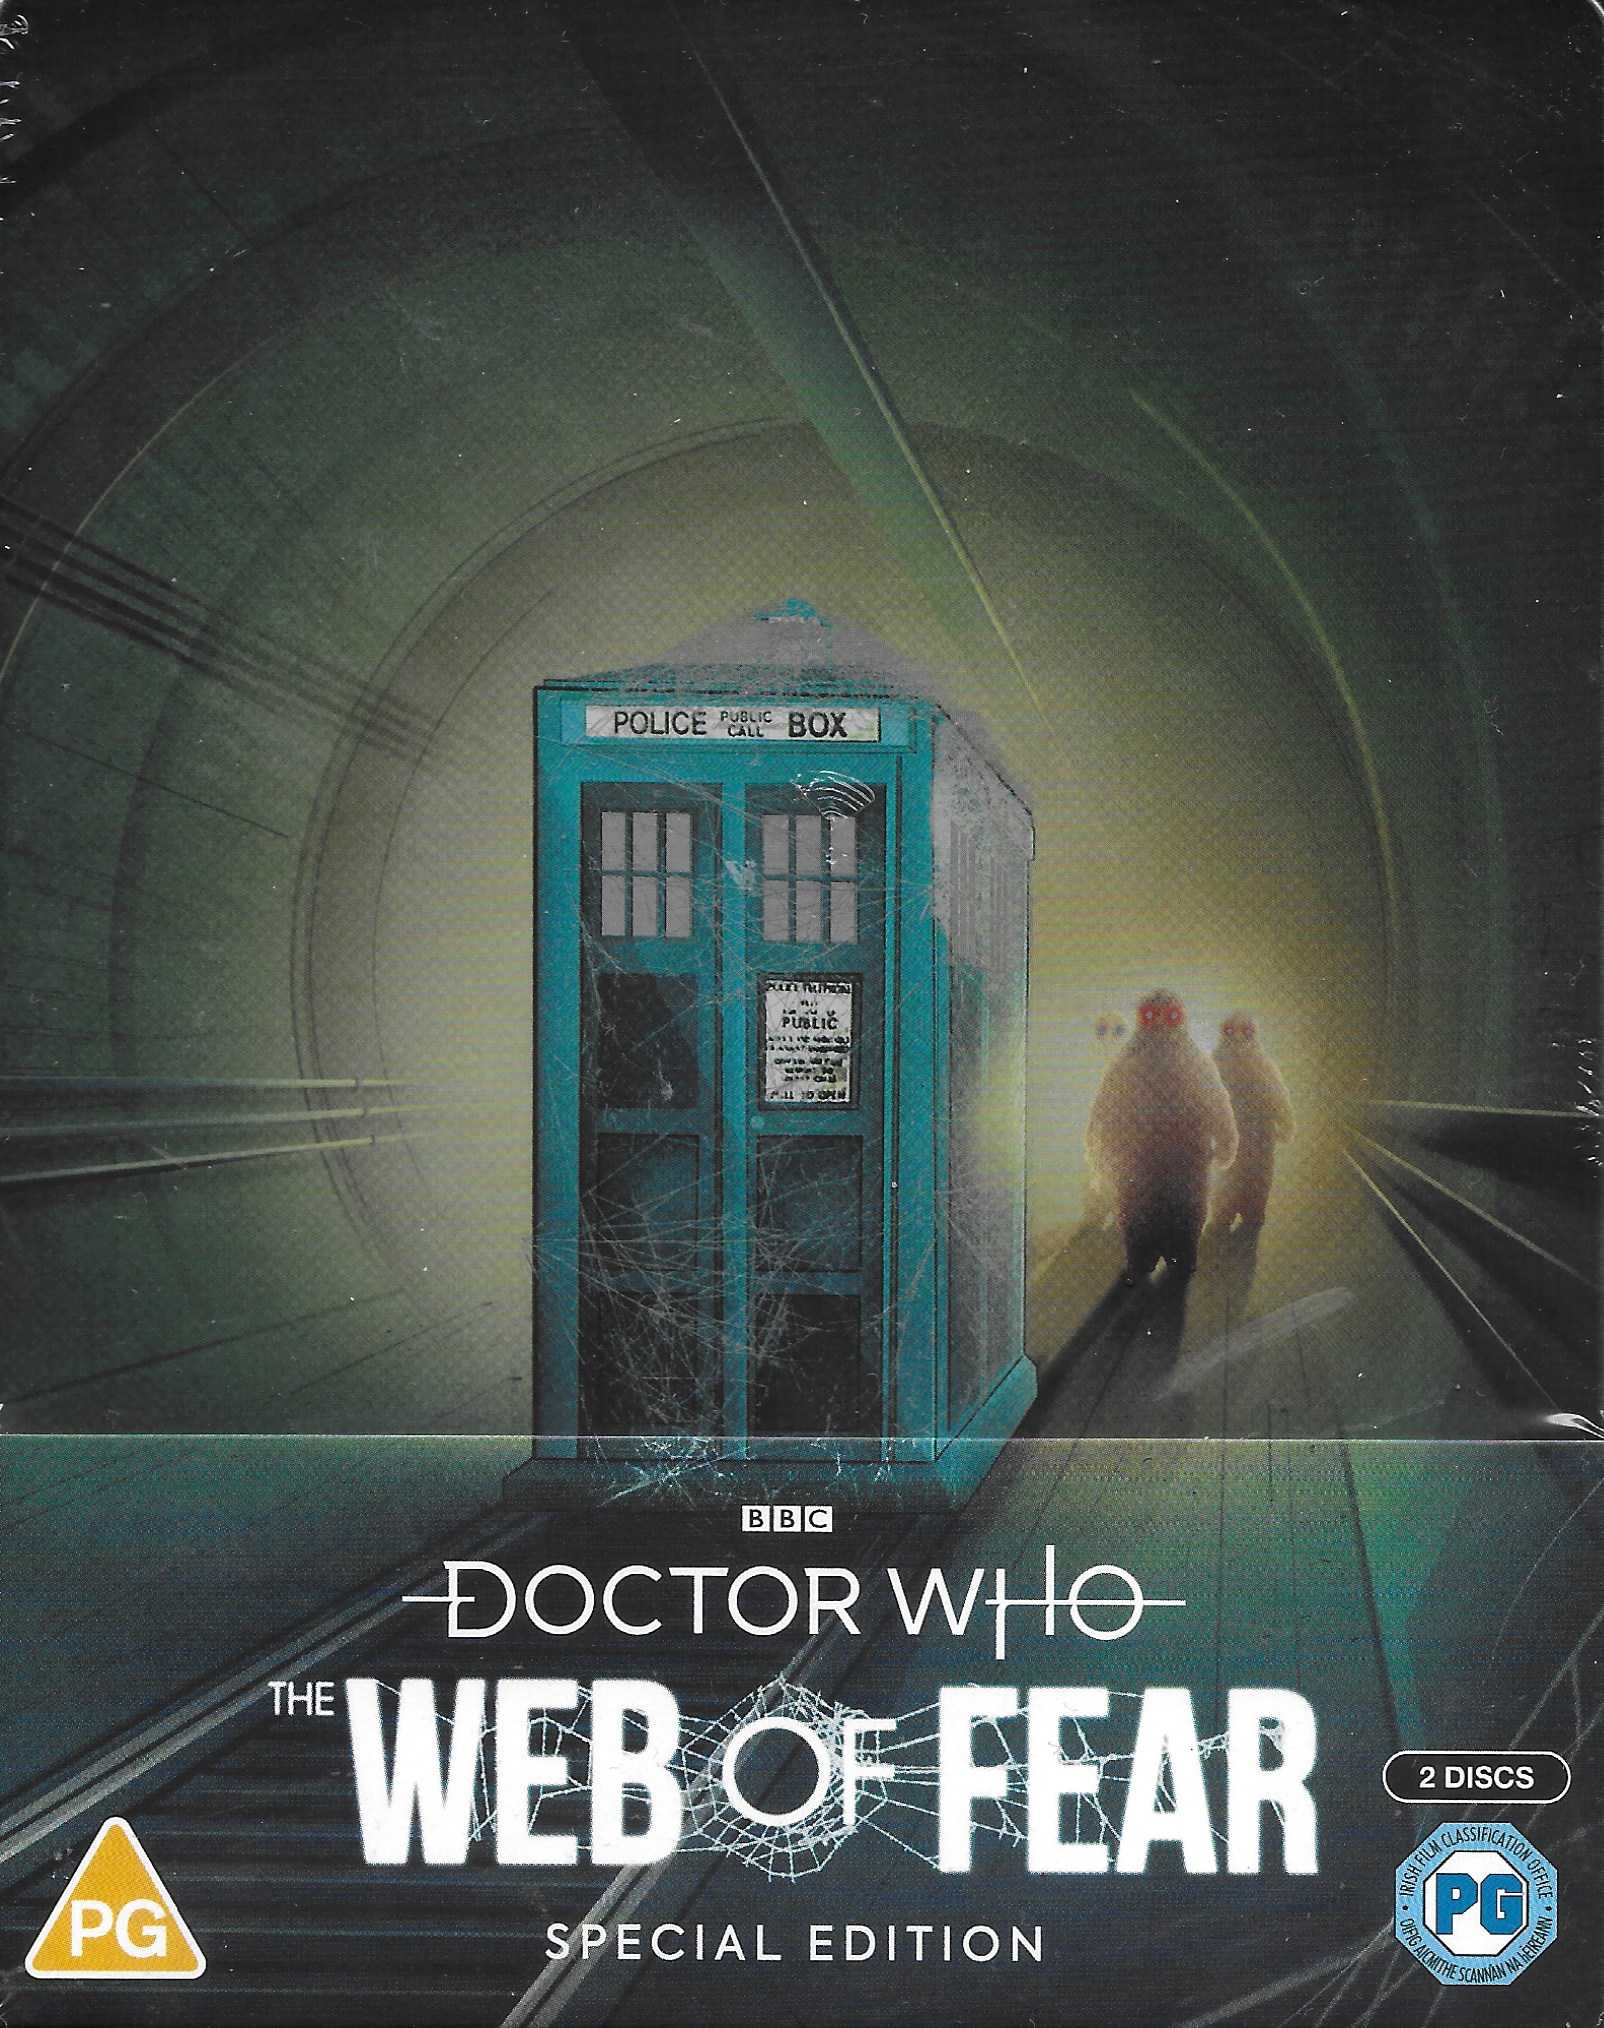 Picture of BBCBD 0522 Doctor Who - The web of fear - Special edition by artist Mervyn Haisman / Henry Lincoln from the BBC blu-rays - Records and Tapes library